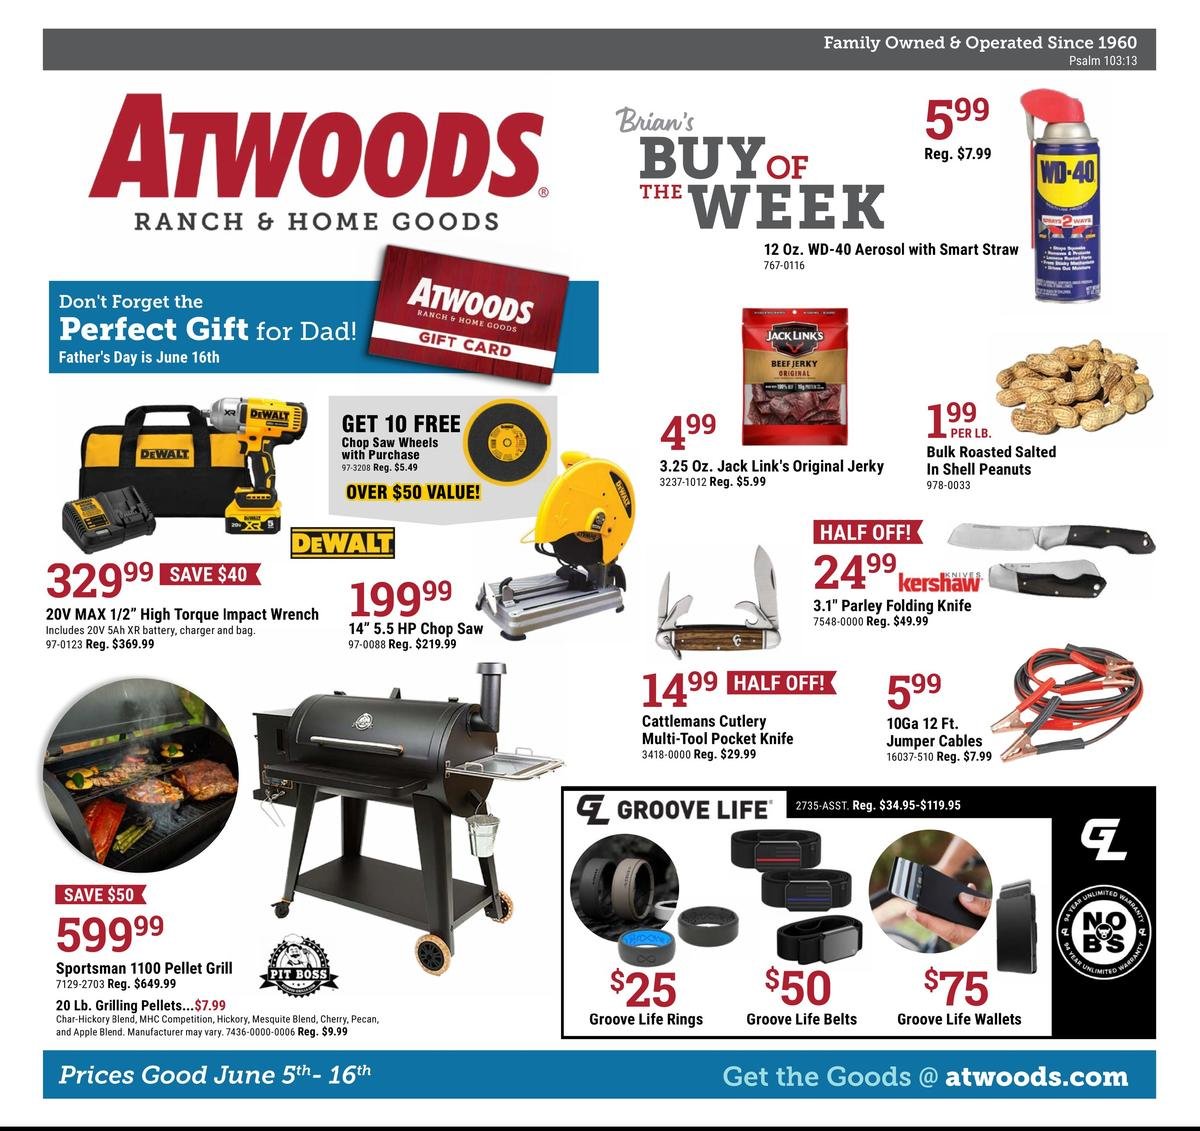 Atwoods Ranch & Home weekly ad - page 1